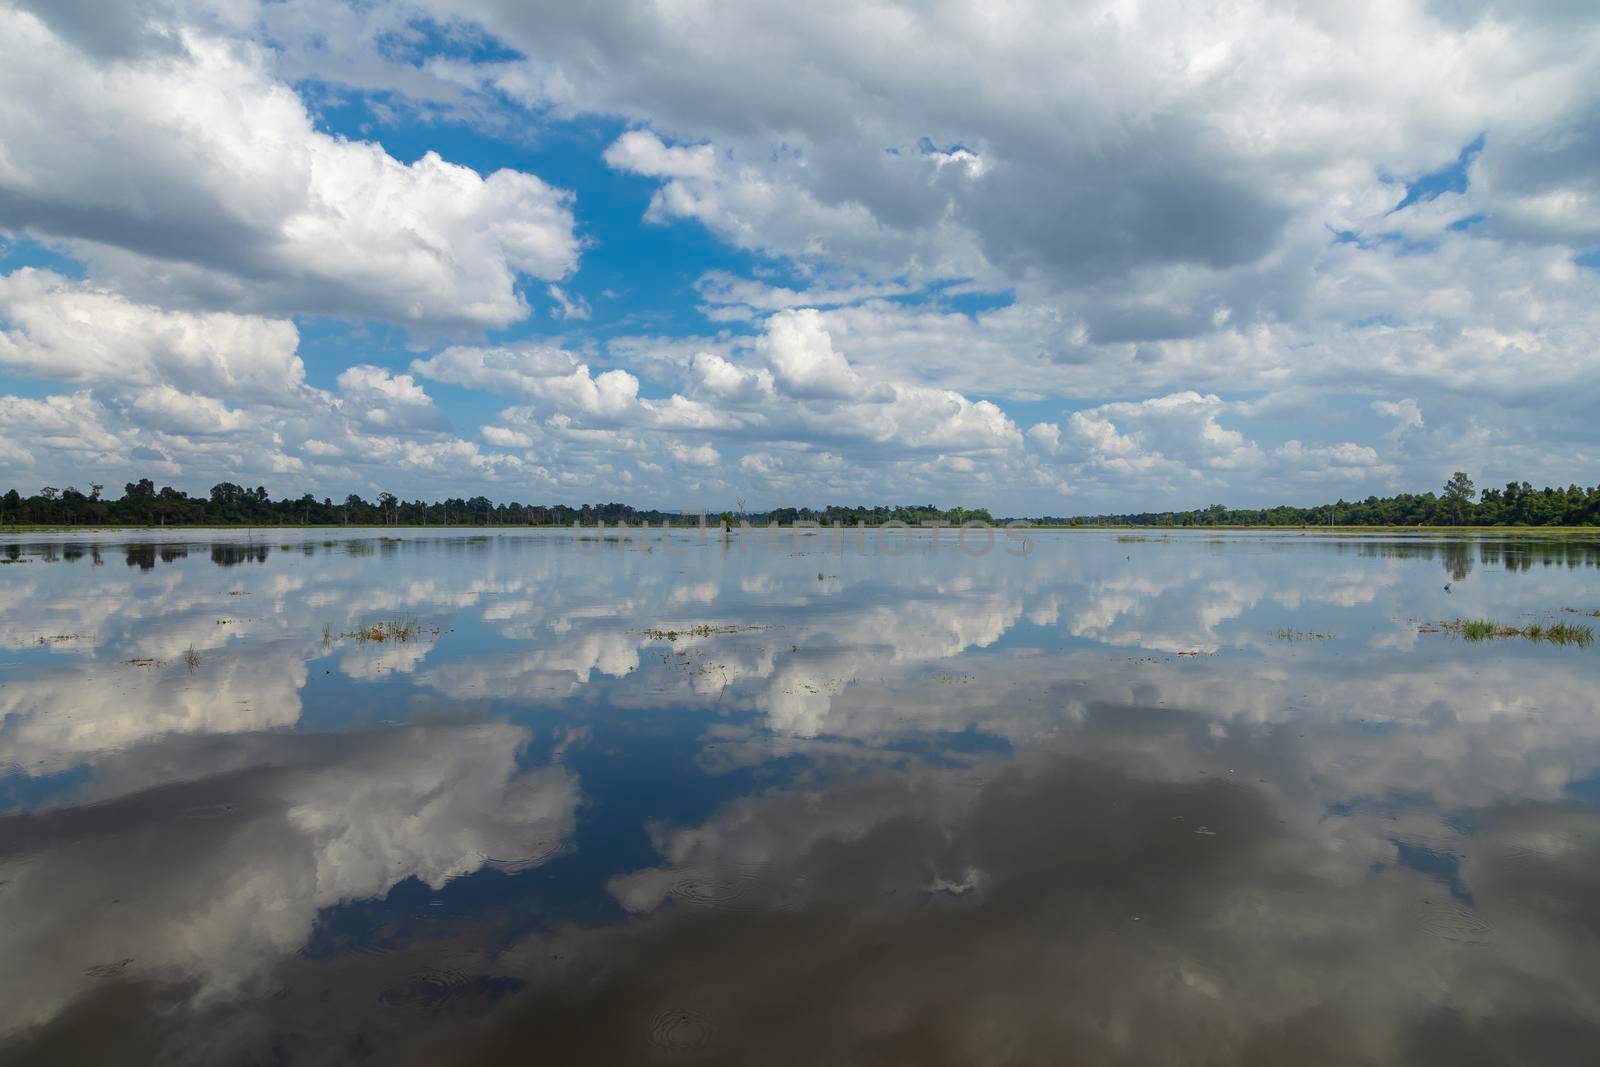 Landscape with clouds reflected, Neak Pean temple, Angkor, Cambodia. by alvarobueno